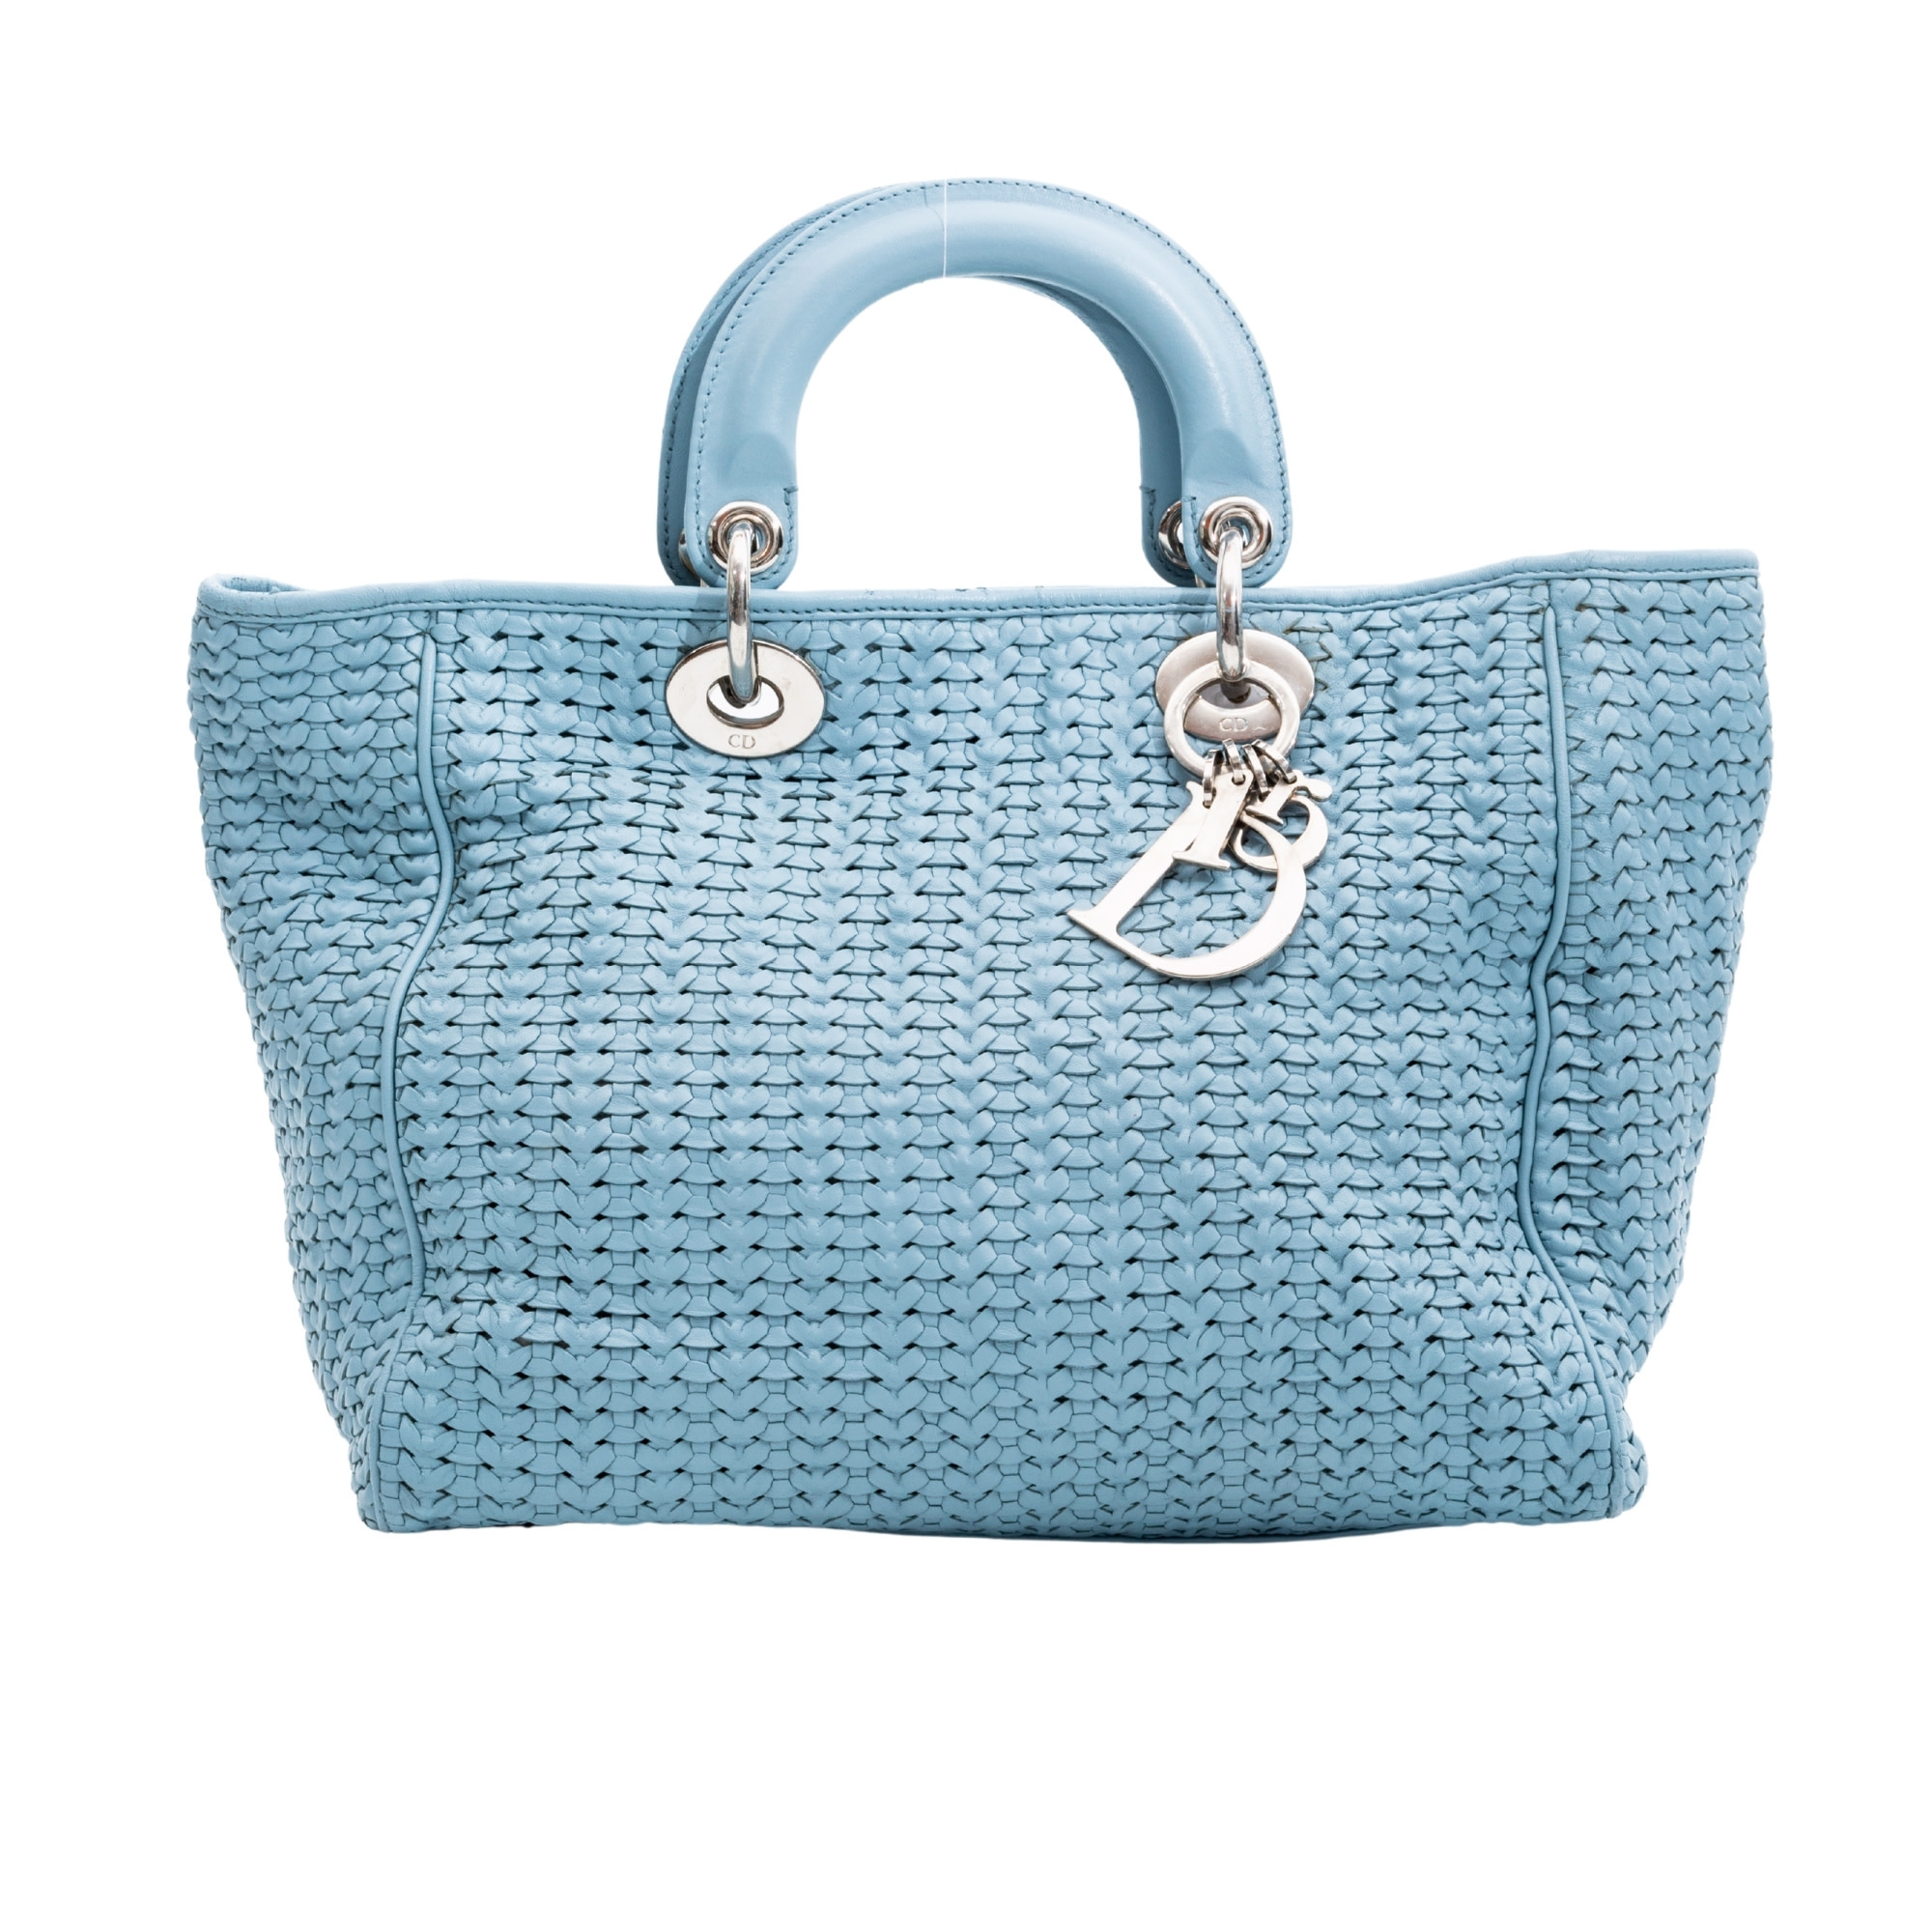 CHRISTIAN DIOR VINTAGE SMALL PASTEL BLUE LADY DIOR TOTE BAG